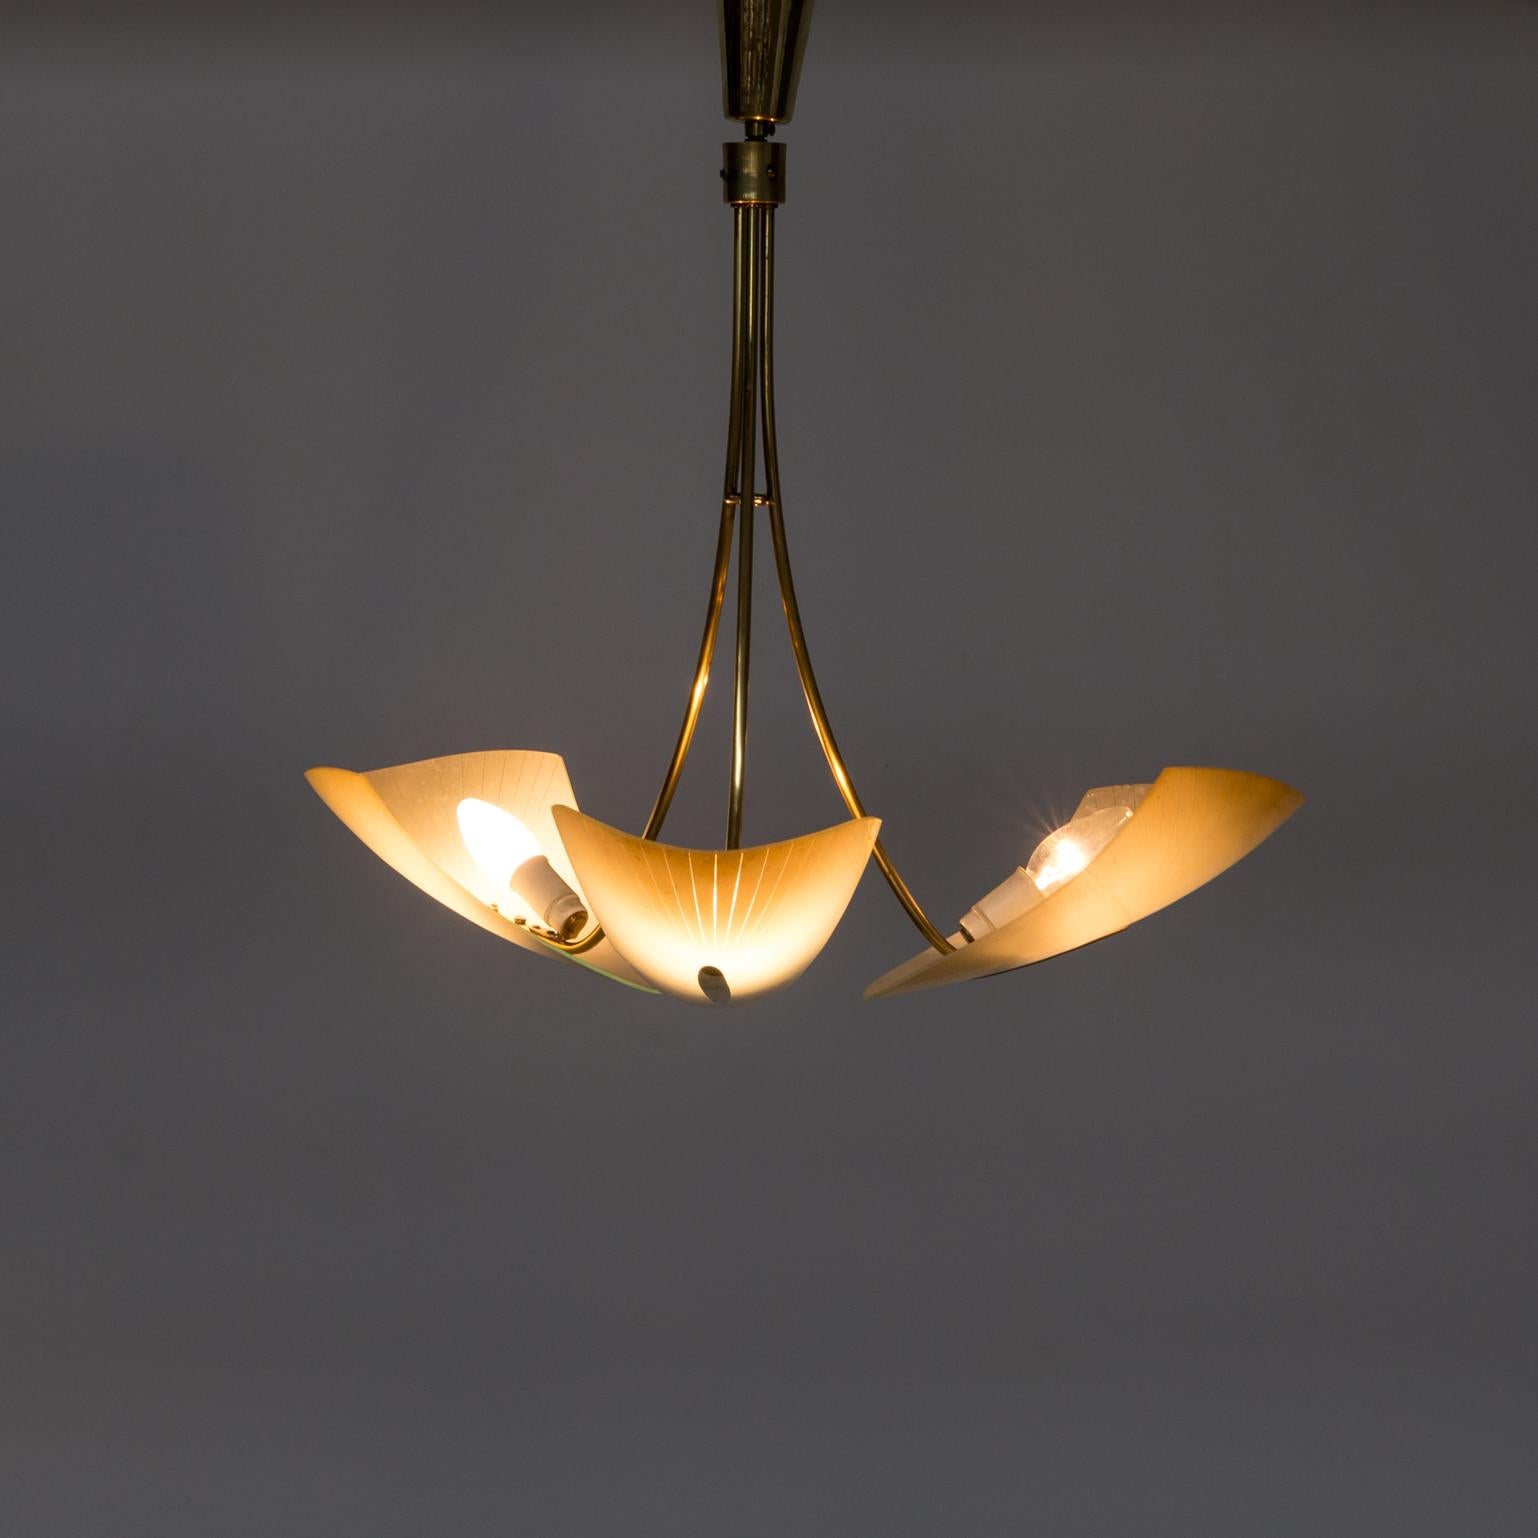 1960s brass and glass pendant hanging lamp. Good and working condition, consistent with age and use.